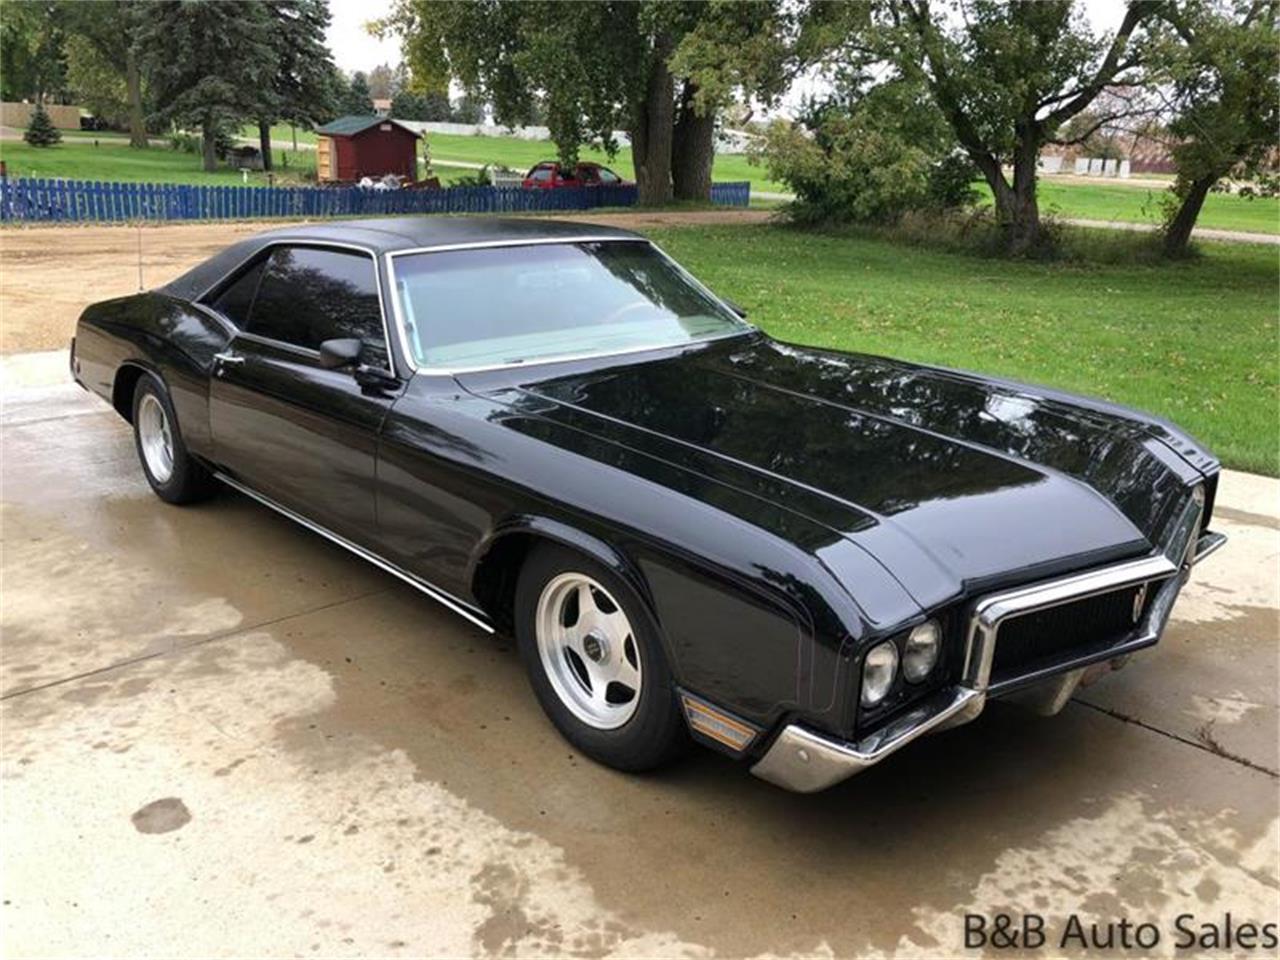 1970 buick riviera for sale classiccars com cc 1152940 1970 buick riviera for sale